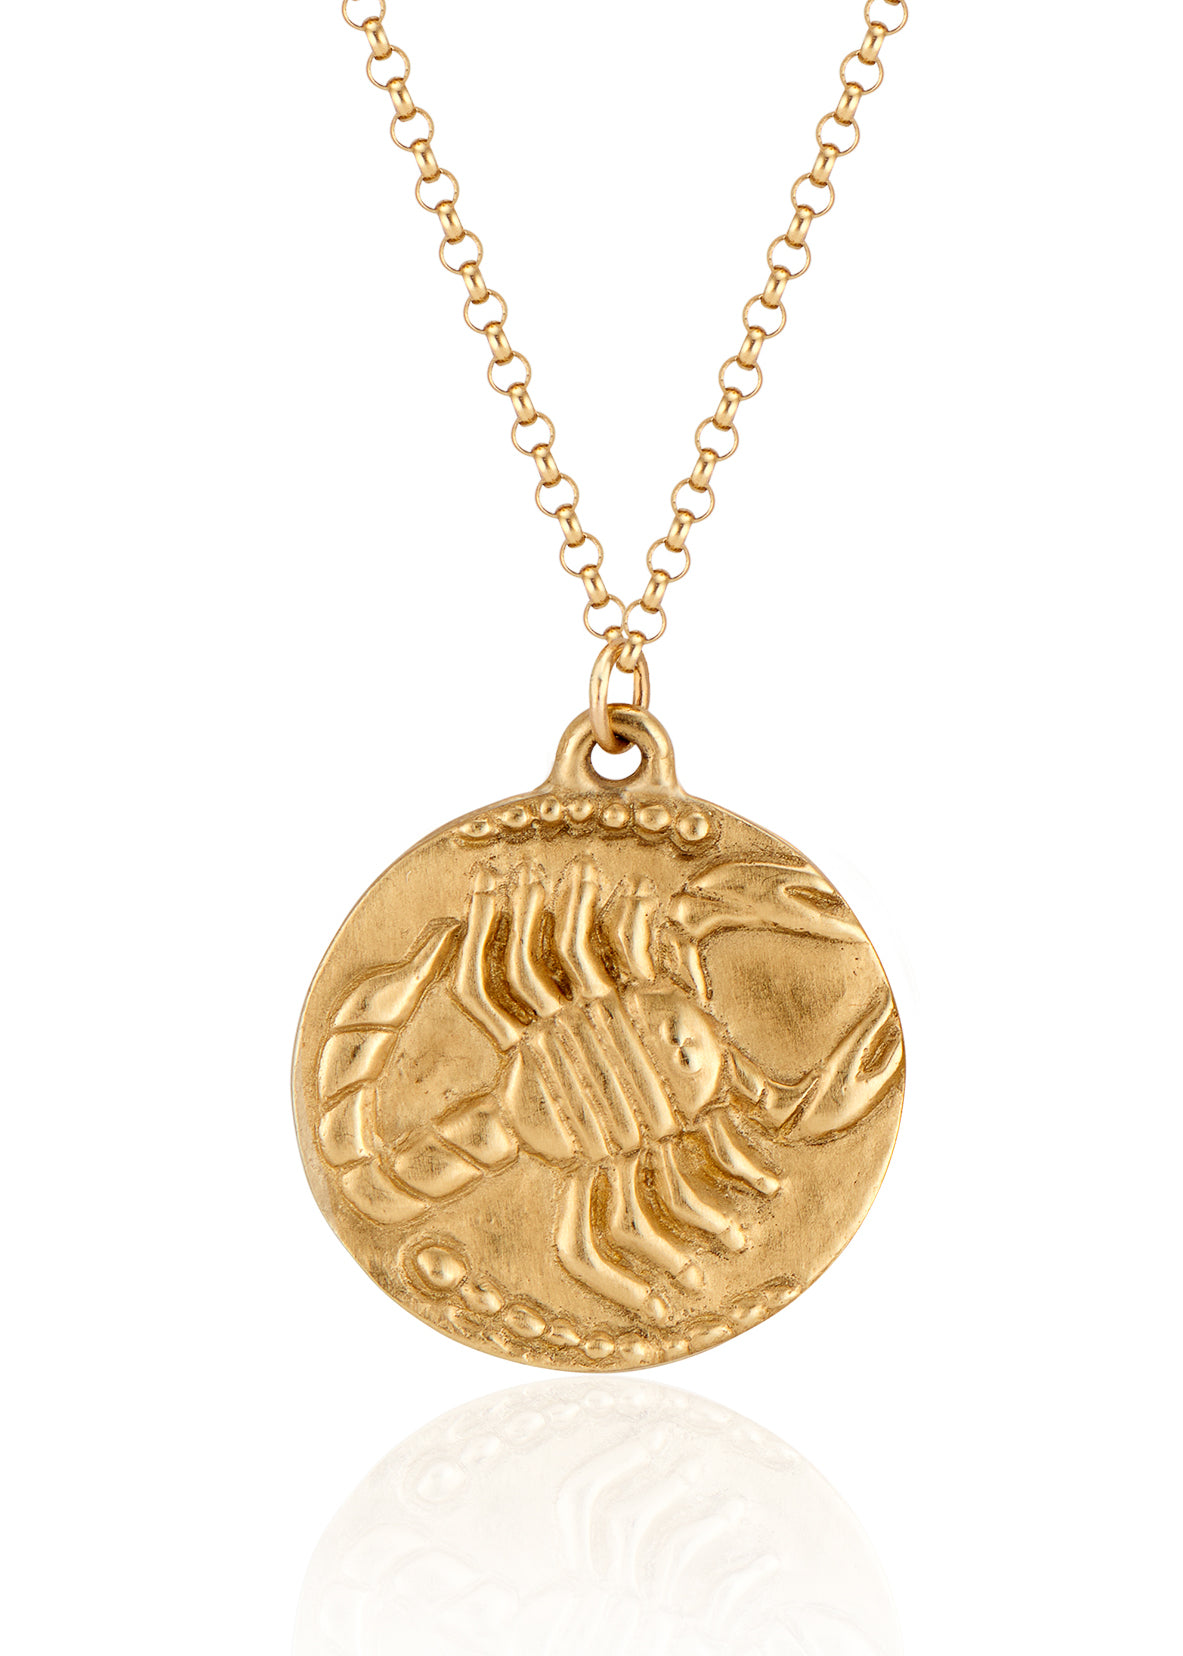 The eighth sign of the Zodiac, water sign Scorpio is a passionate truth-seeker who leads with decisiveness. A hand-carved, fierce yet whimsical scorpion graces this pendant, creating a necklace that captures the power of the celestial sky.